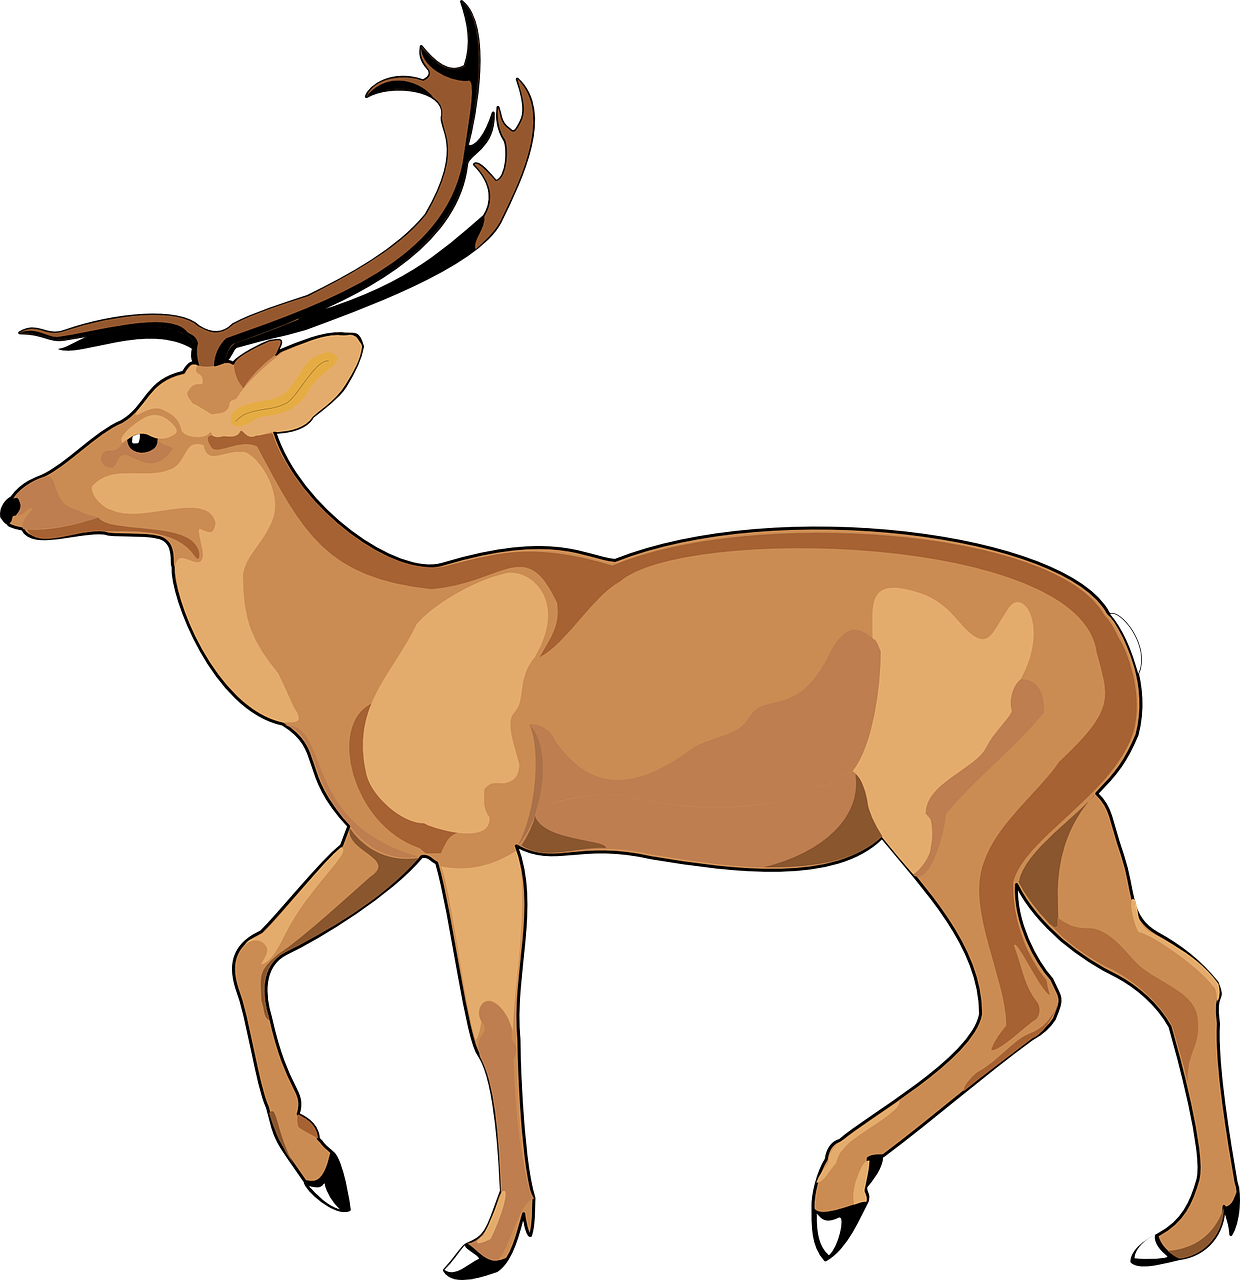 a close up of a deer on a black background, an illustration of, mingei, side view centered, walk, fully colored, stylised illustration